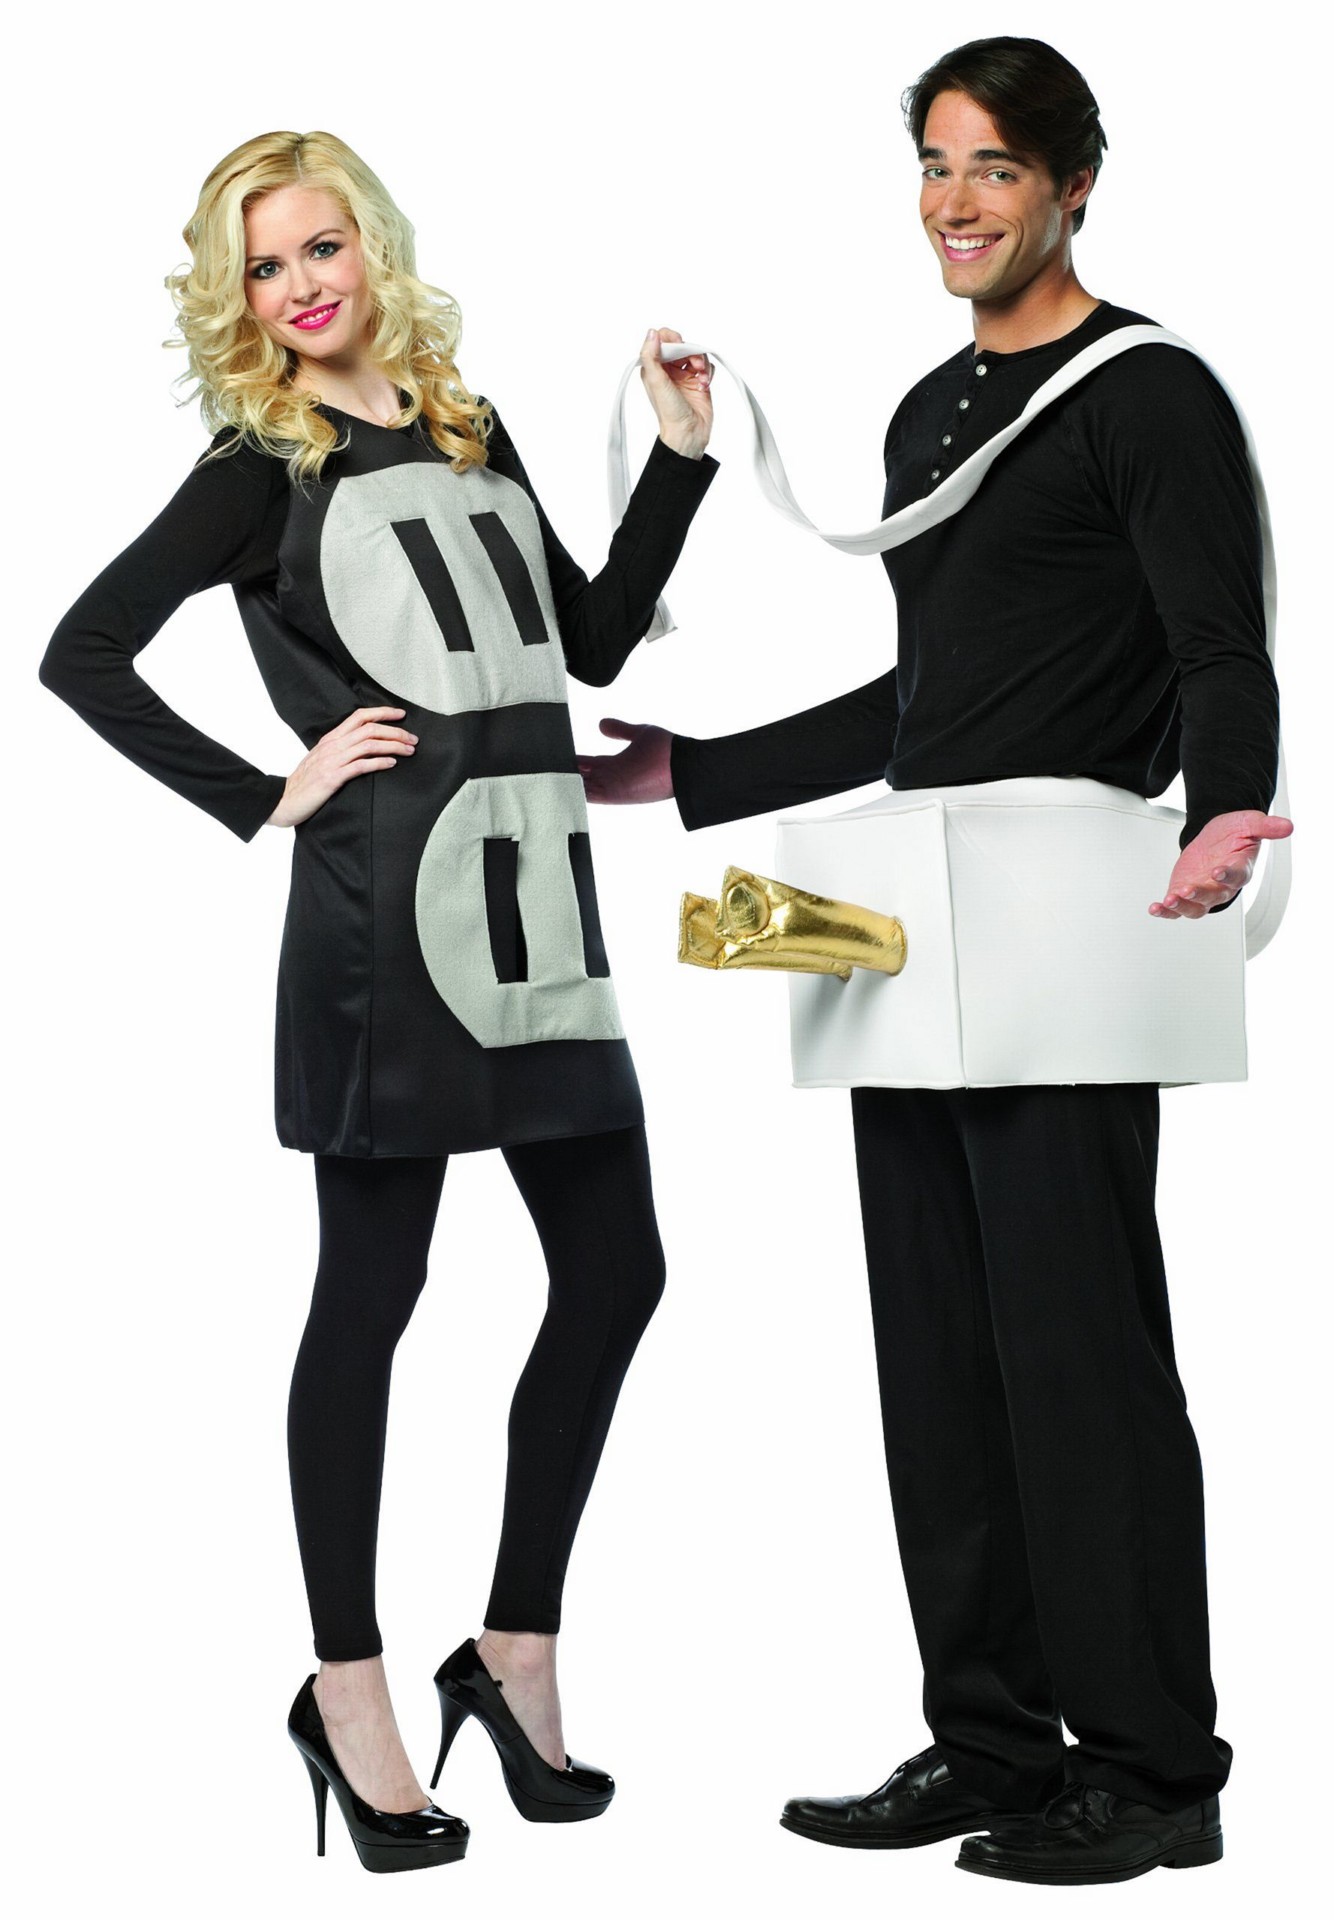 Plug and socket couples costume lightweight adult from toyho